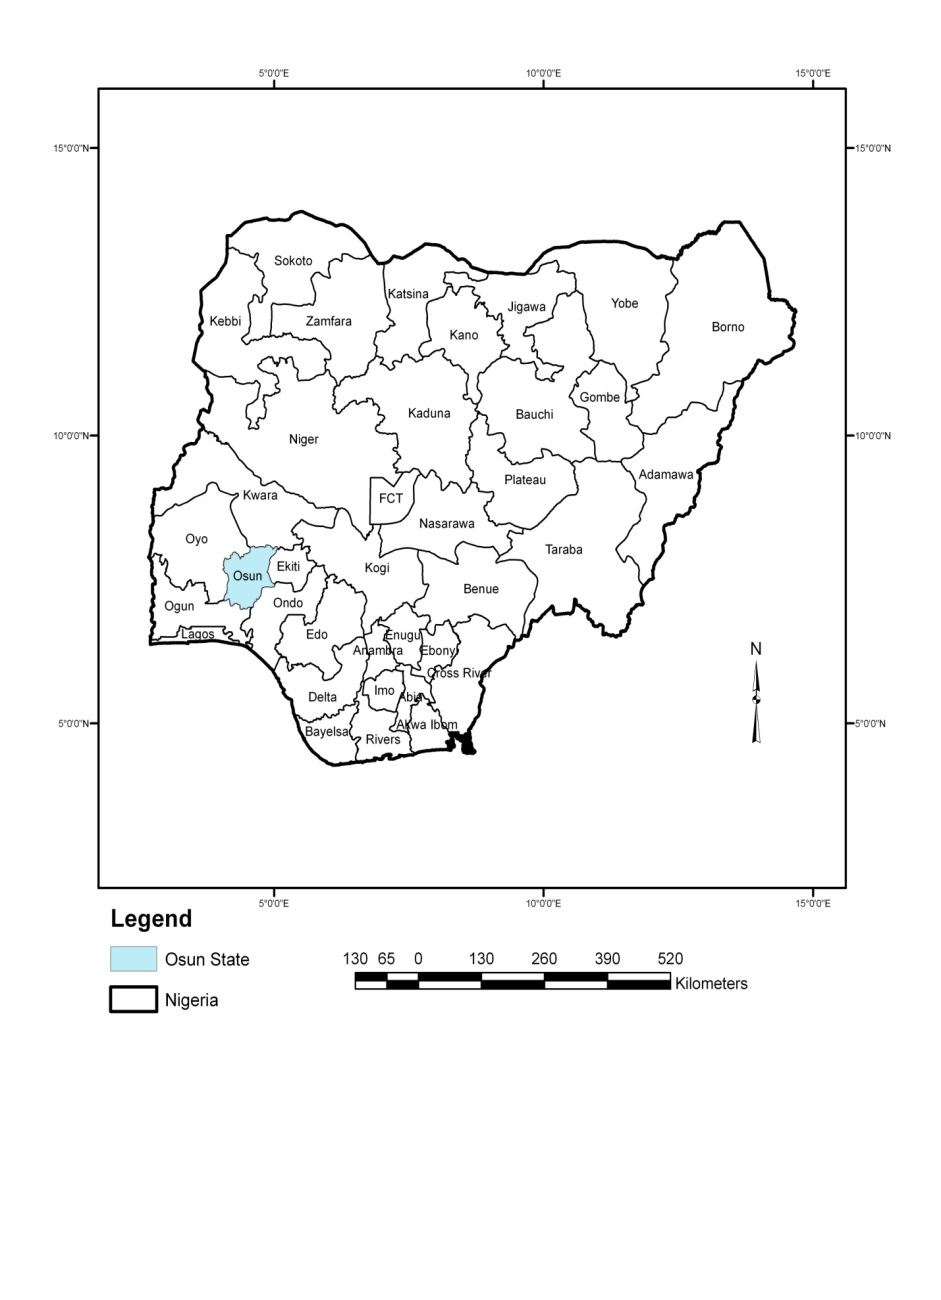 Assessment of the Influence of Climate Change on Sustainable Water Supply in Osogbo, Osun State, Nigeria